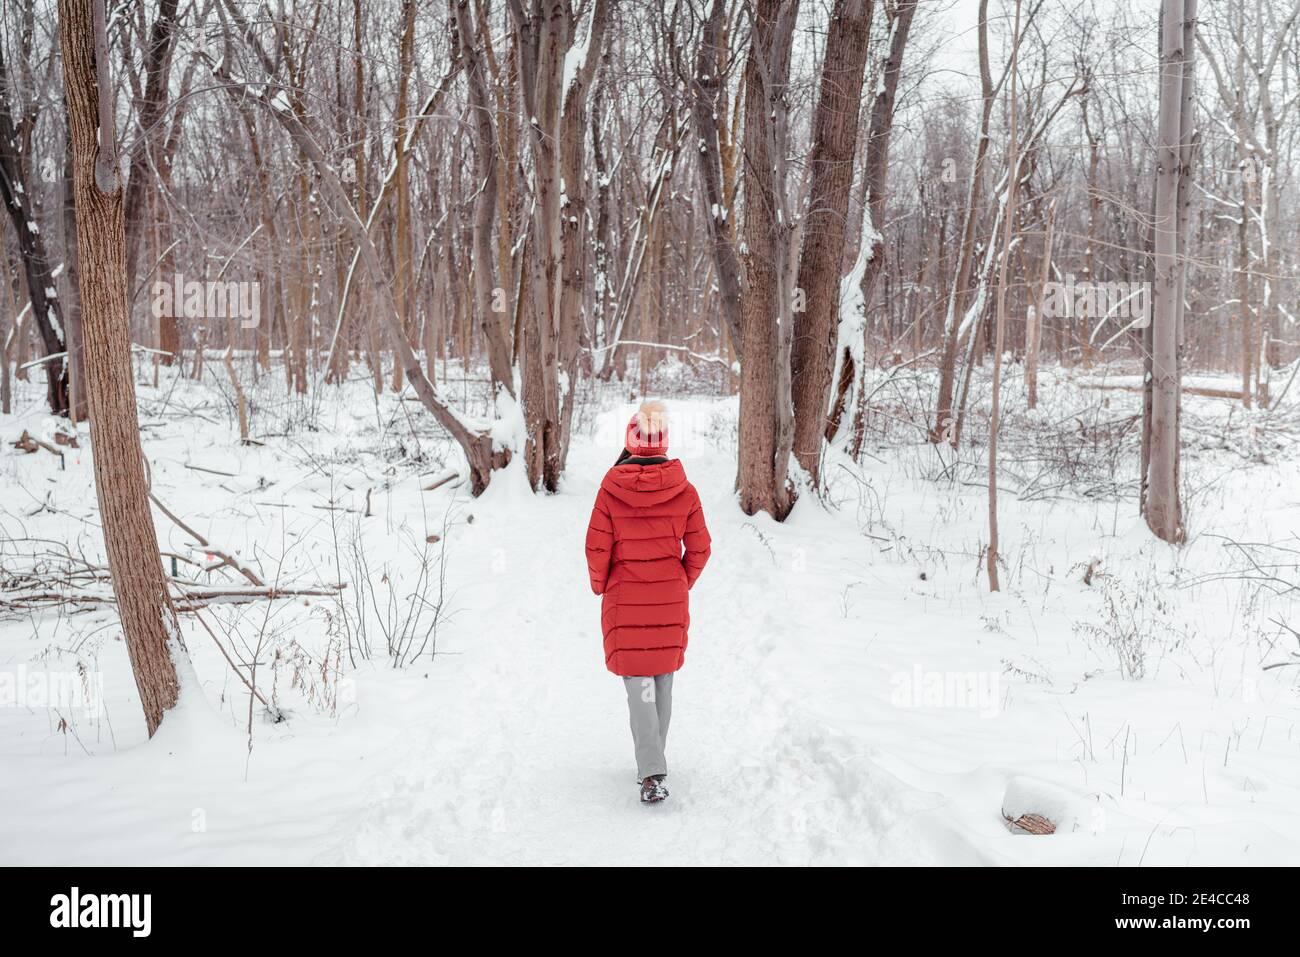 Winter nature walk woman walking in snowy forest trail outdoors. View from behind of woman in long red coat Stock Photo